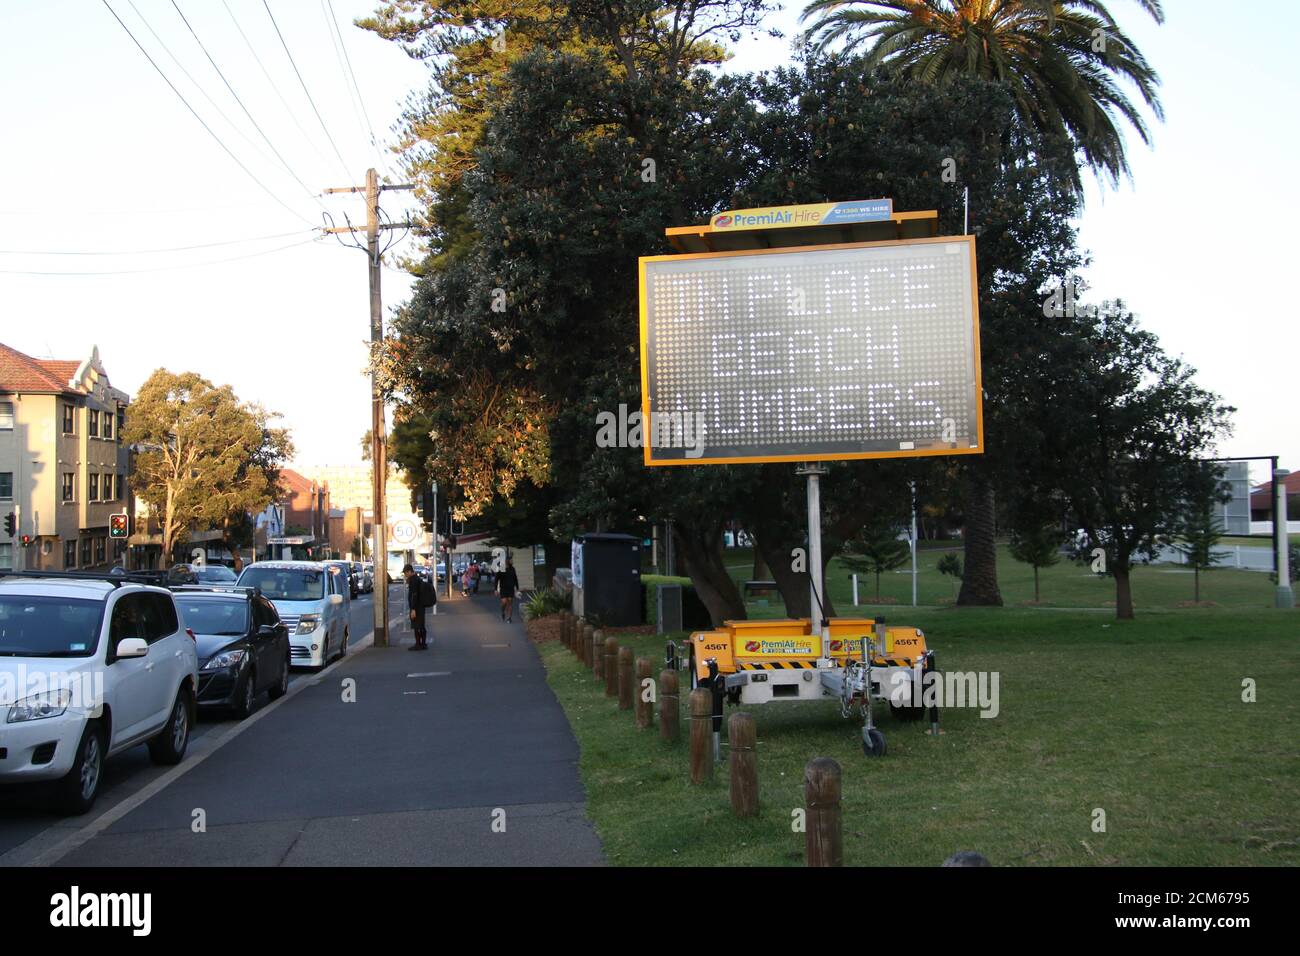 Public Health Order sign on Bondi Road indicating a maximum of 20 people are allowed at outdoor gatherings. Stock Photo